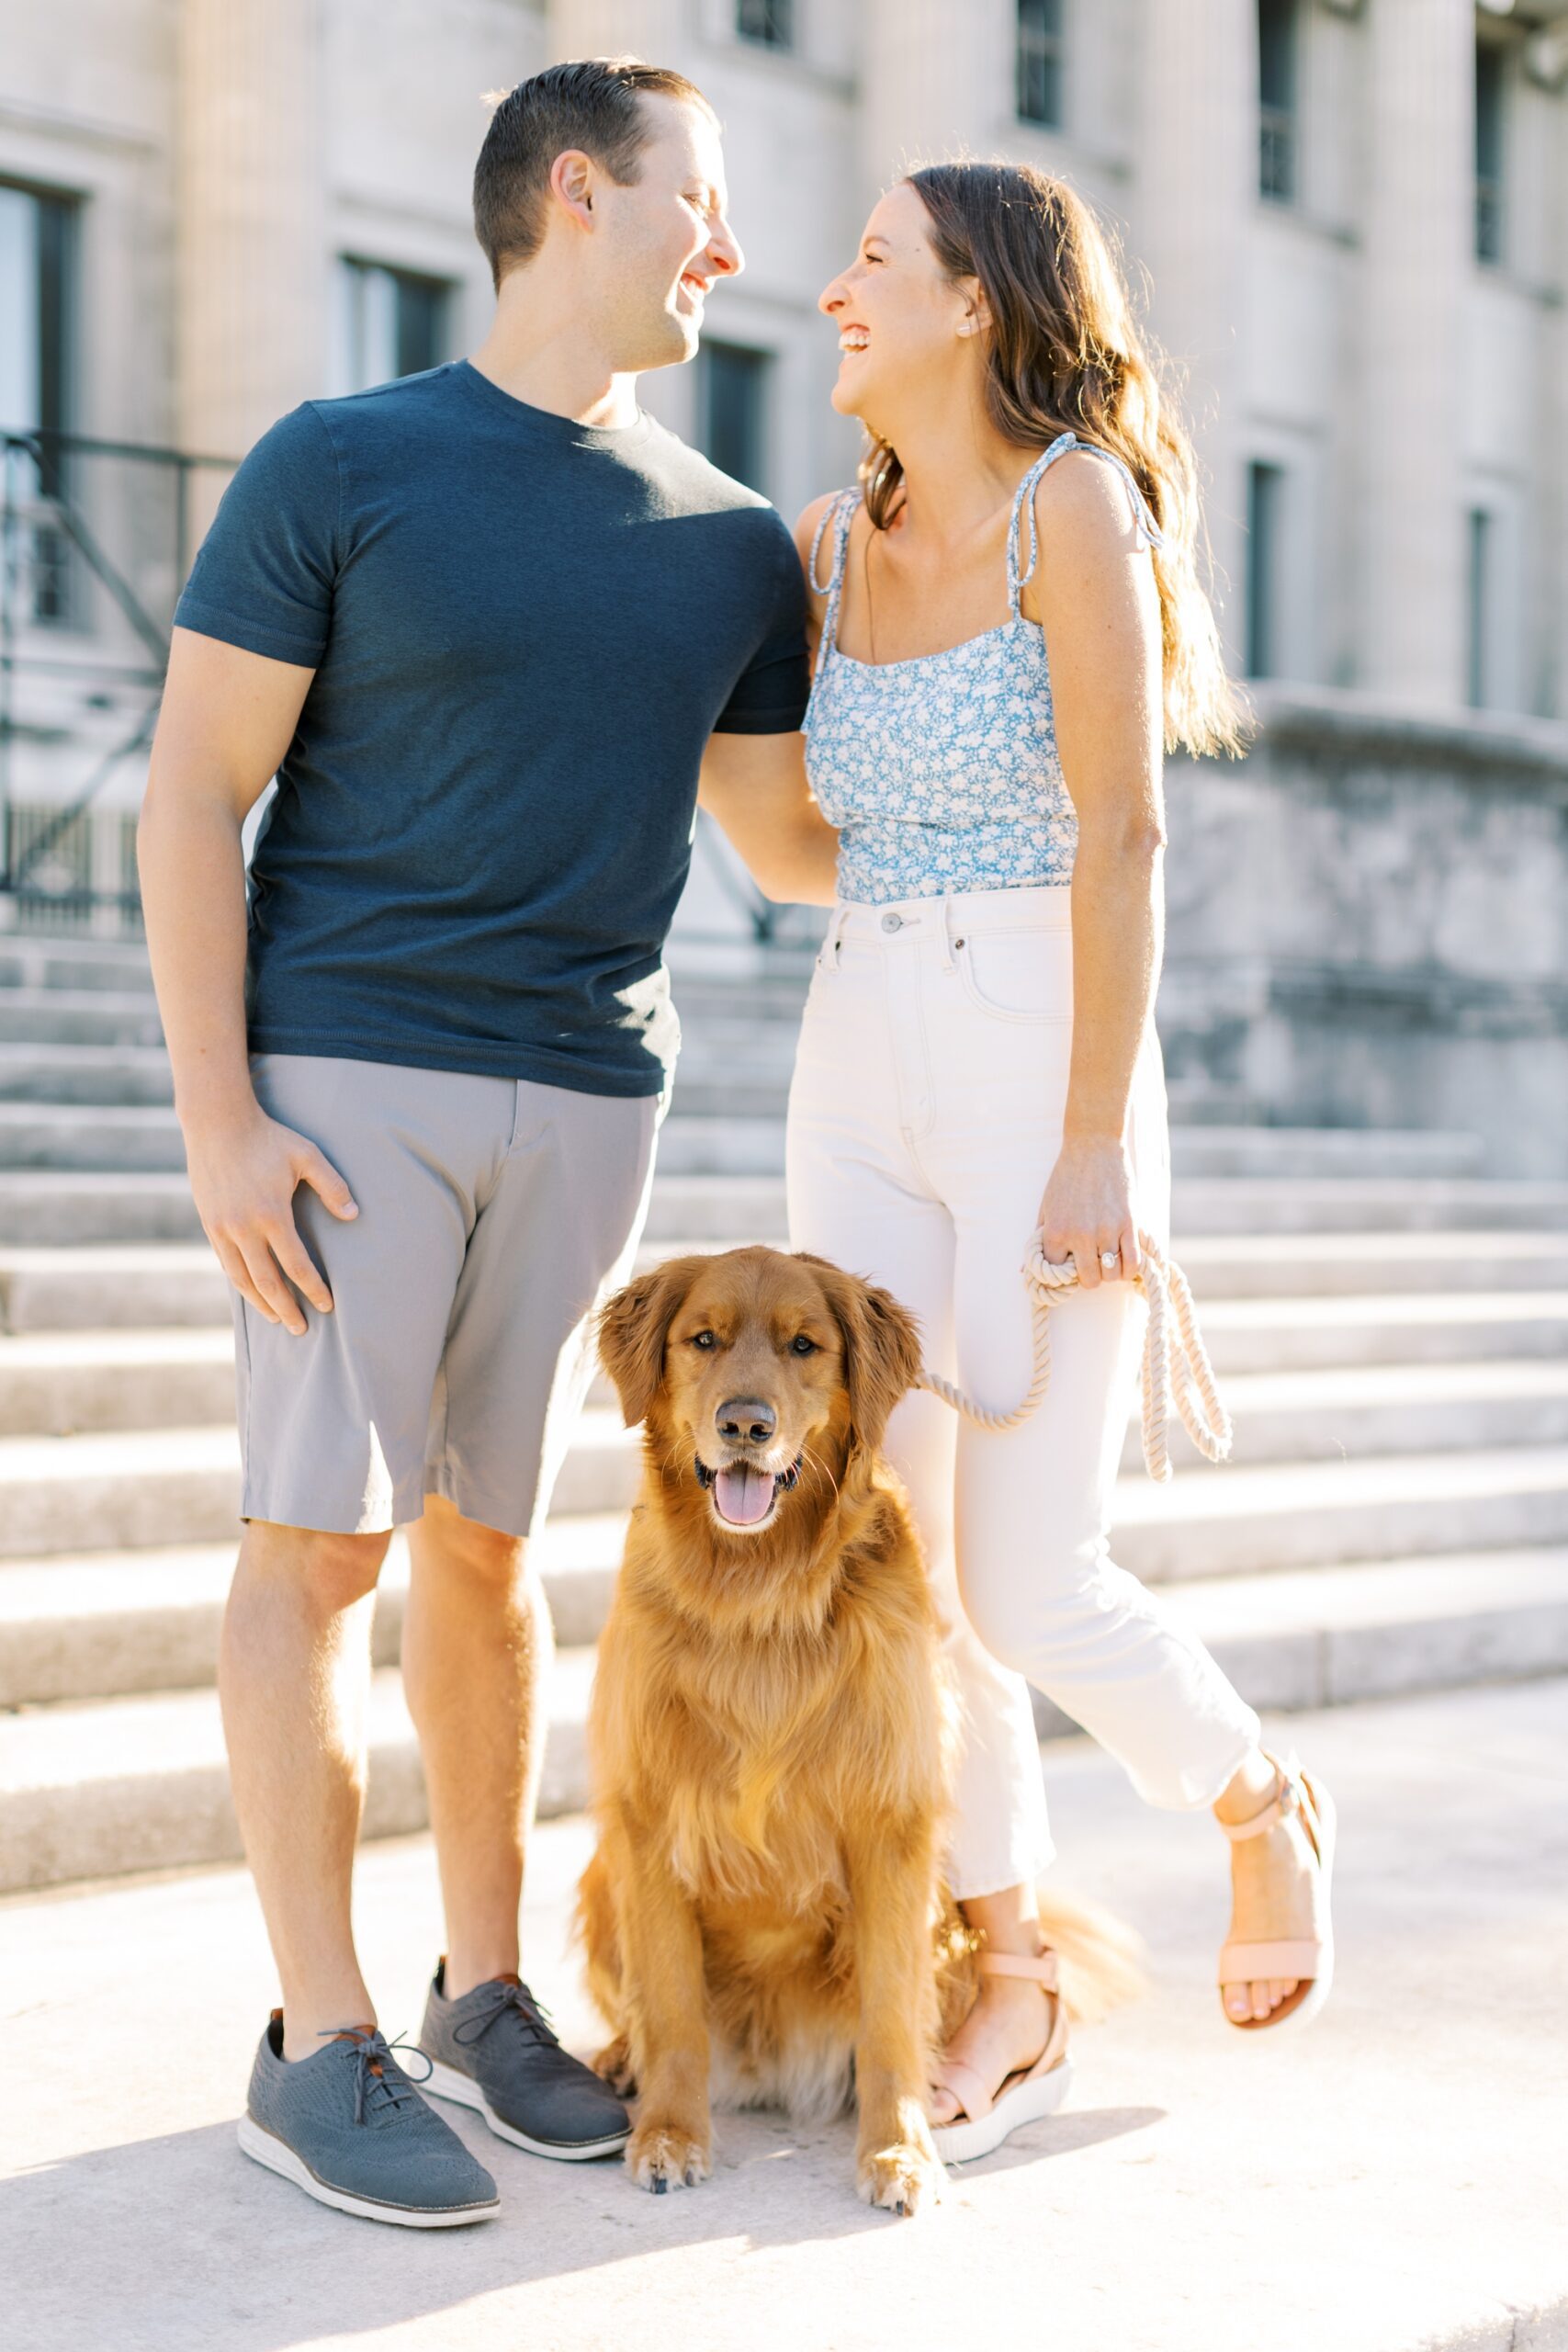 The couple posed with their dog for engagement photos with a dog